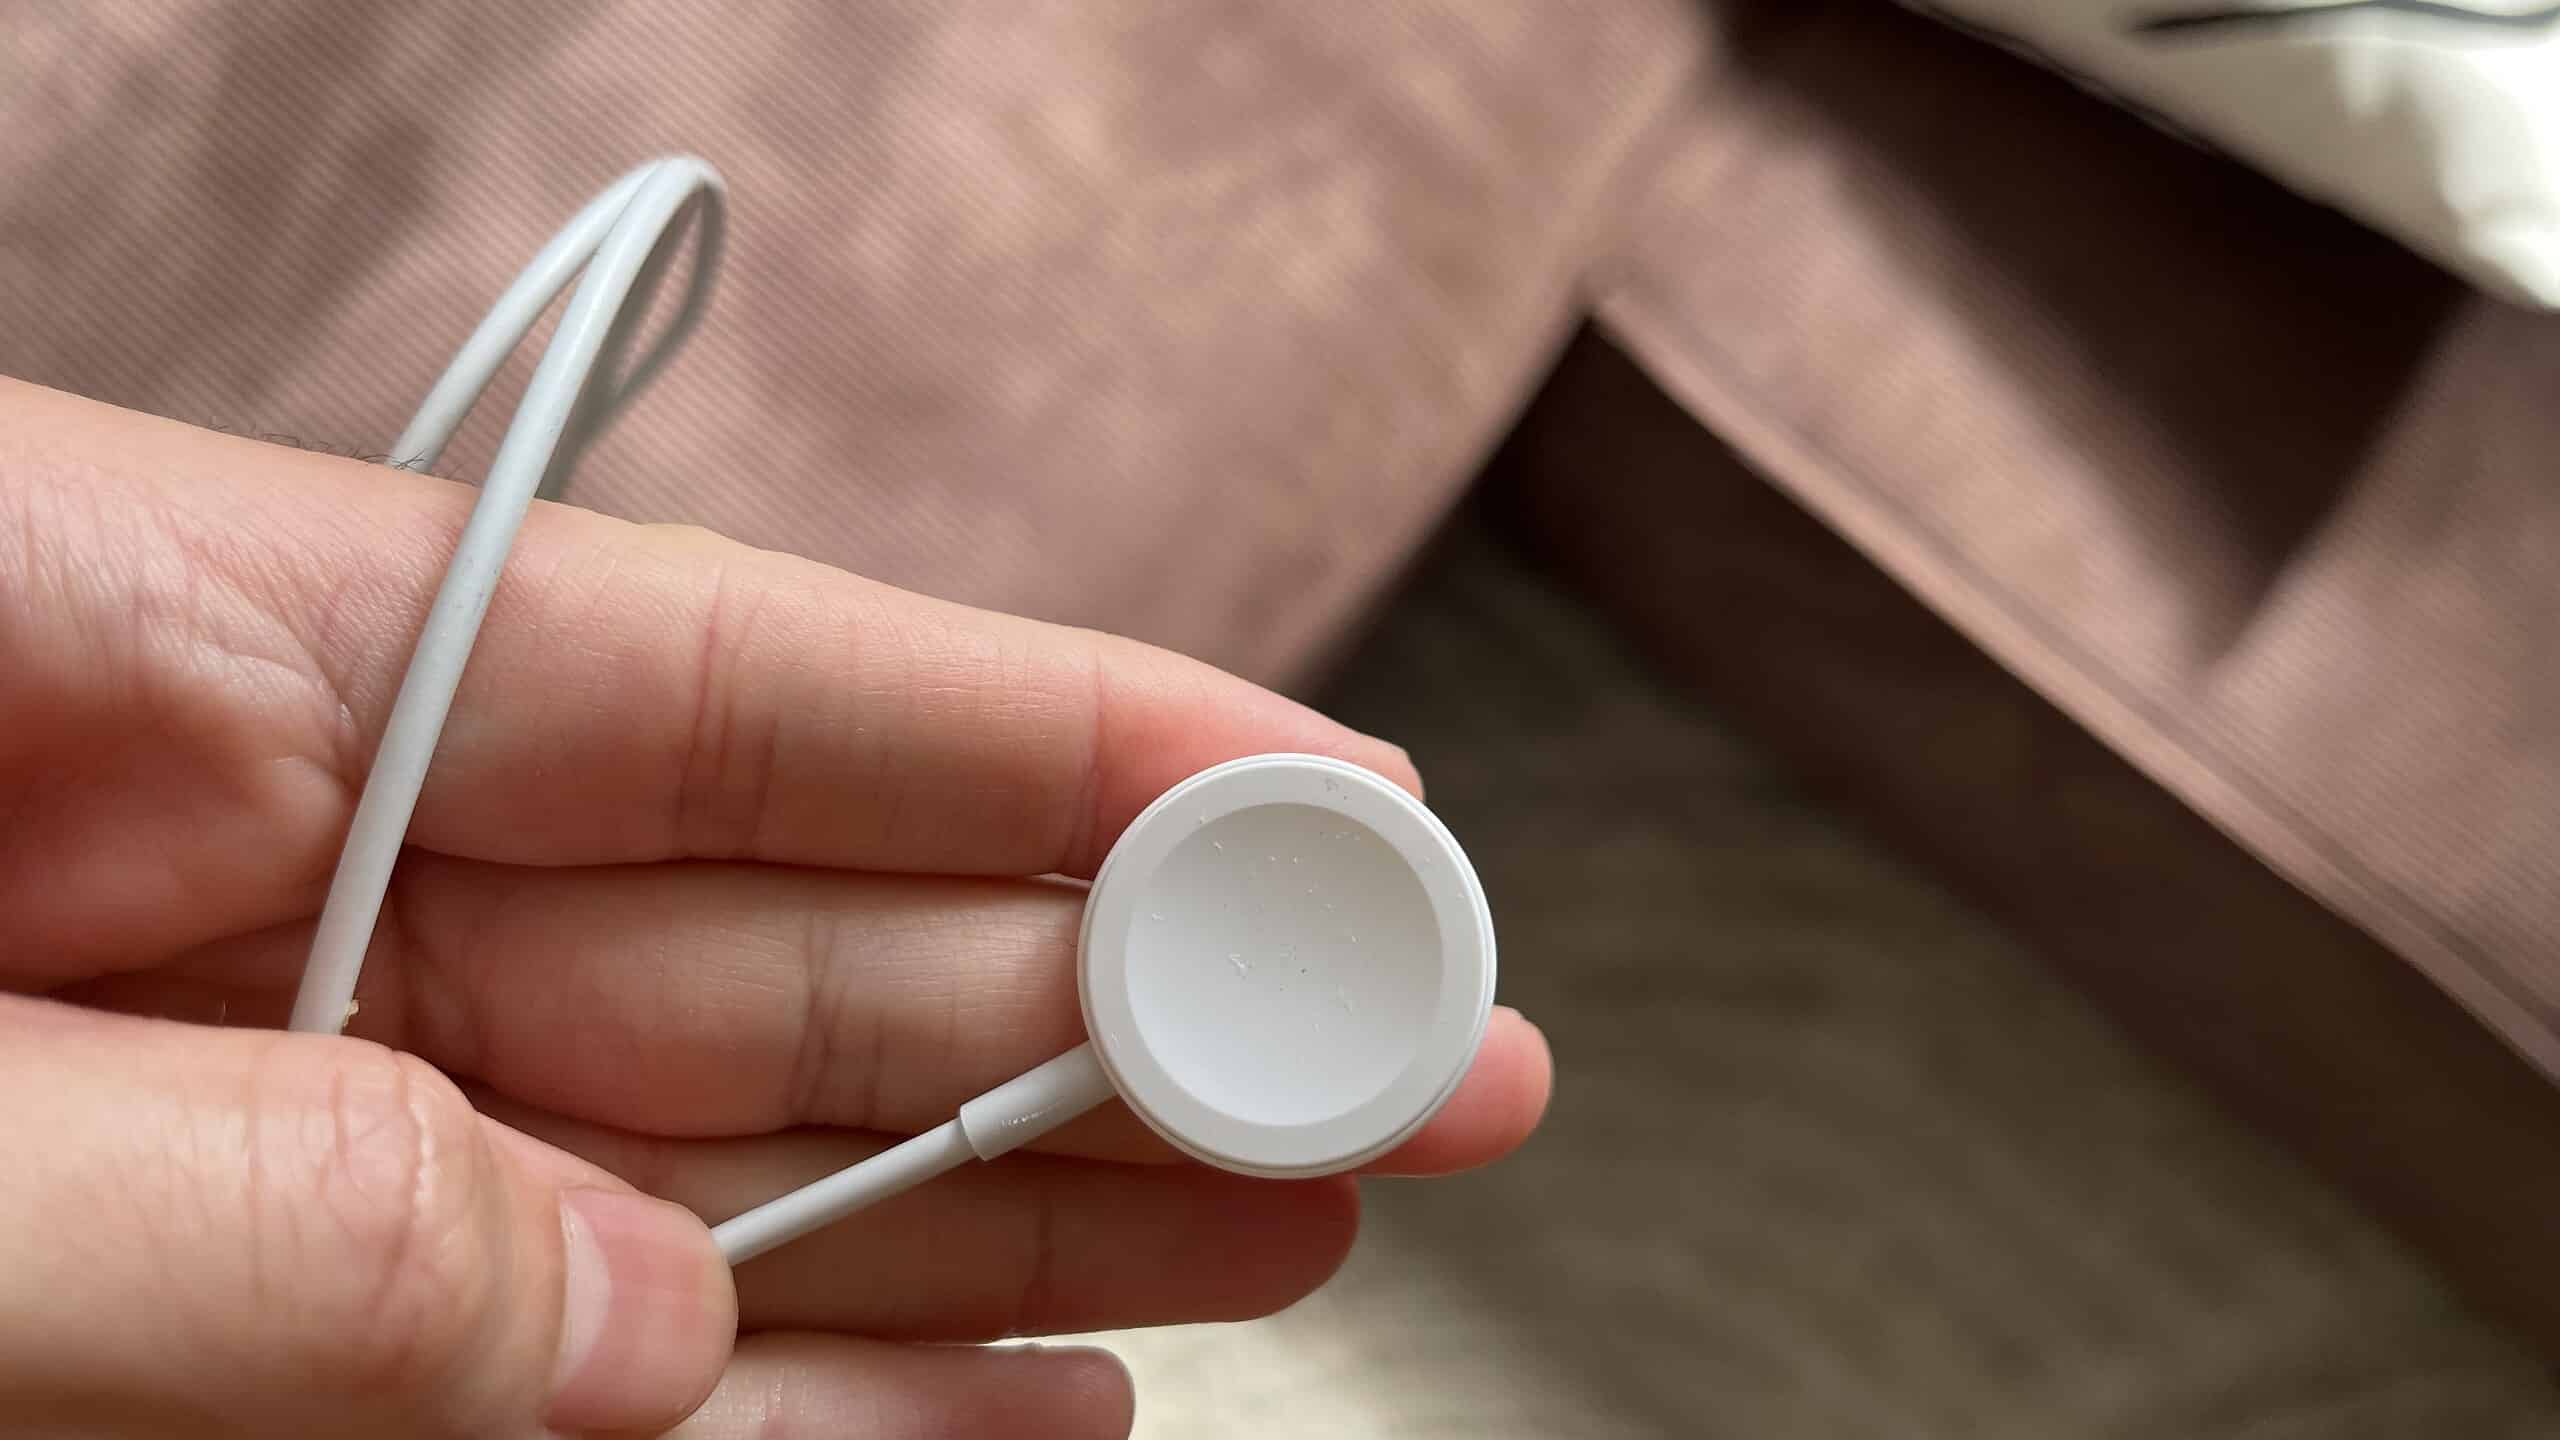 Apple Watch dust showing up on a charger